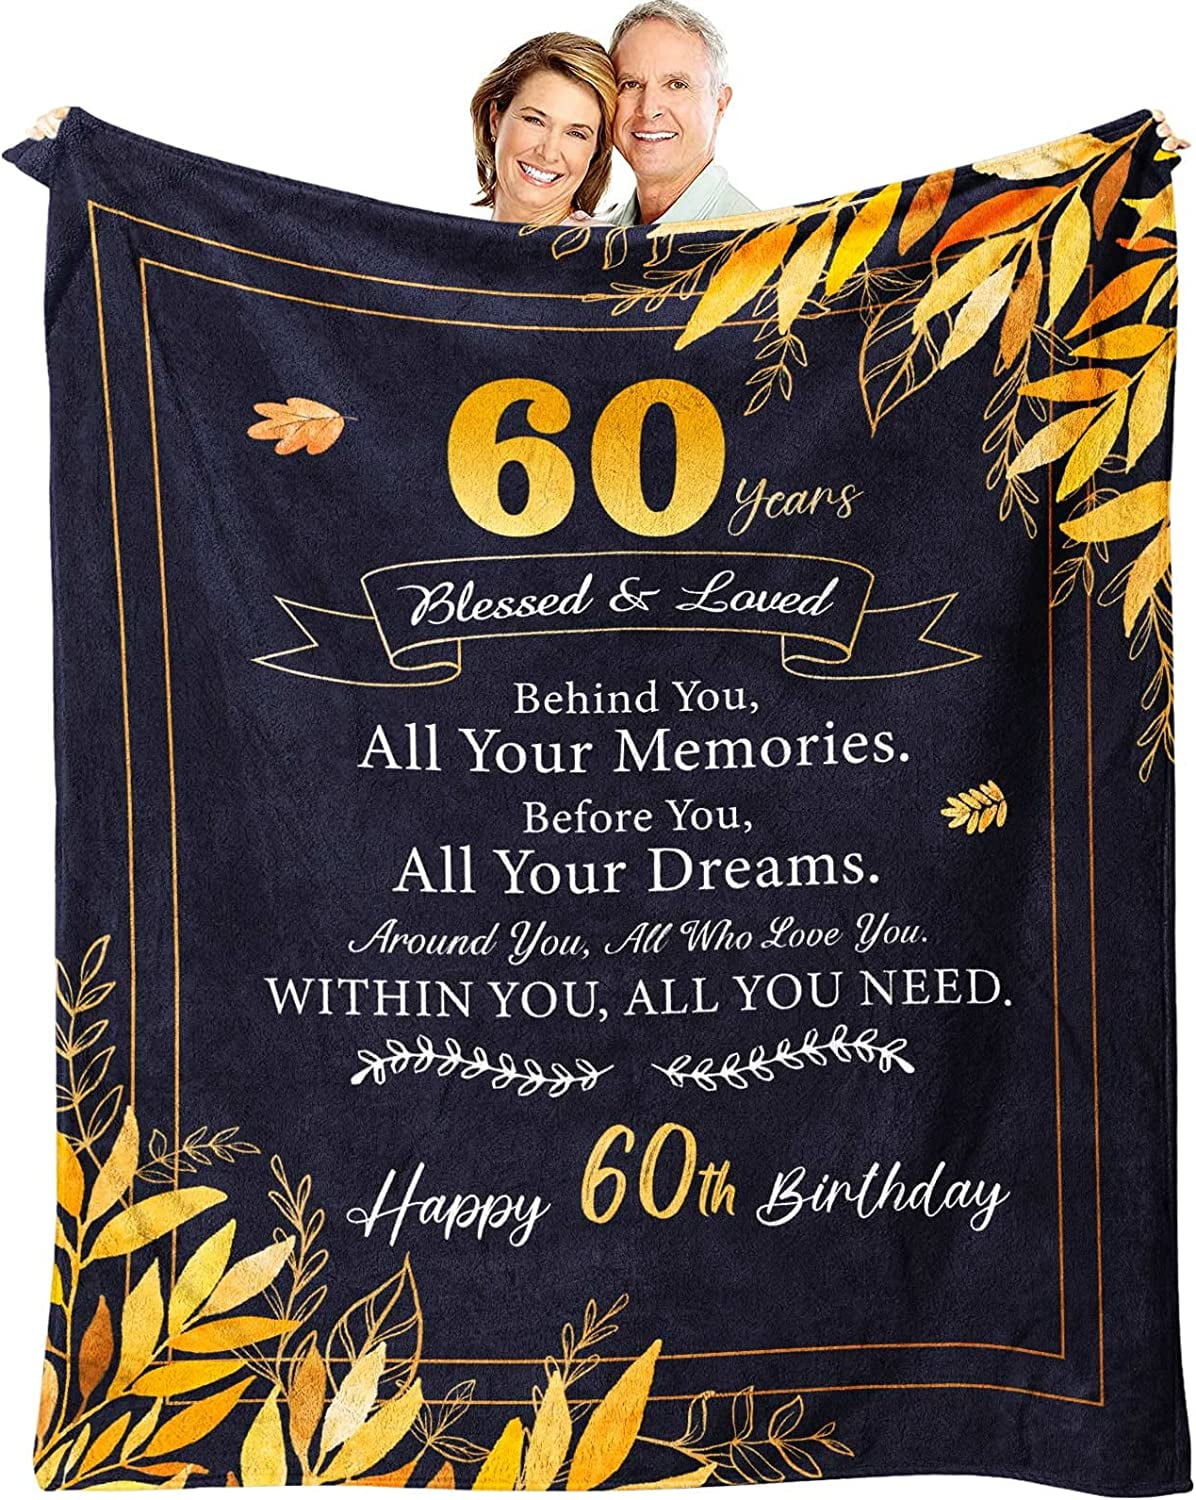 60th Birthday Gifts for Women - 60th Birthday Gift Ideas Blanket 60X50 -  Gifts Ideas for 60th Birthday - Birthday Gifts for 60 Year Old Woman - 60th